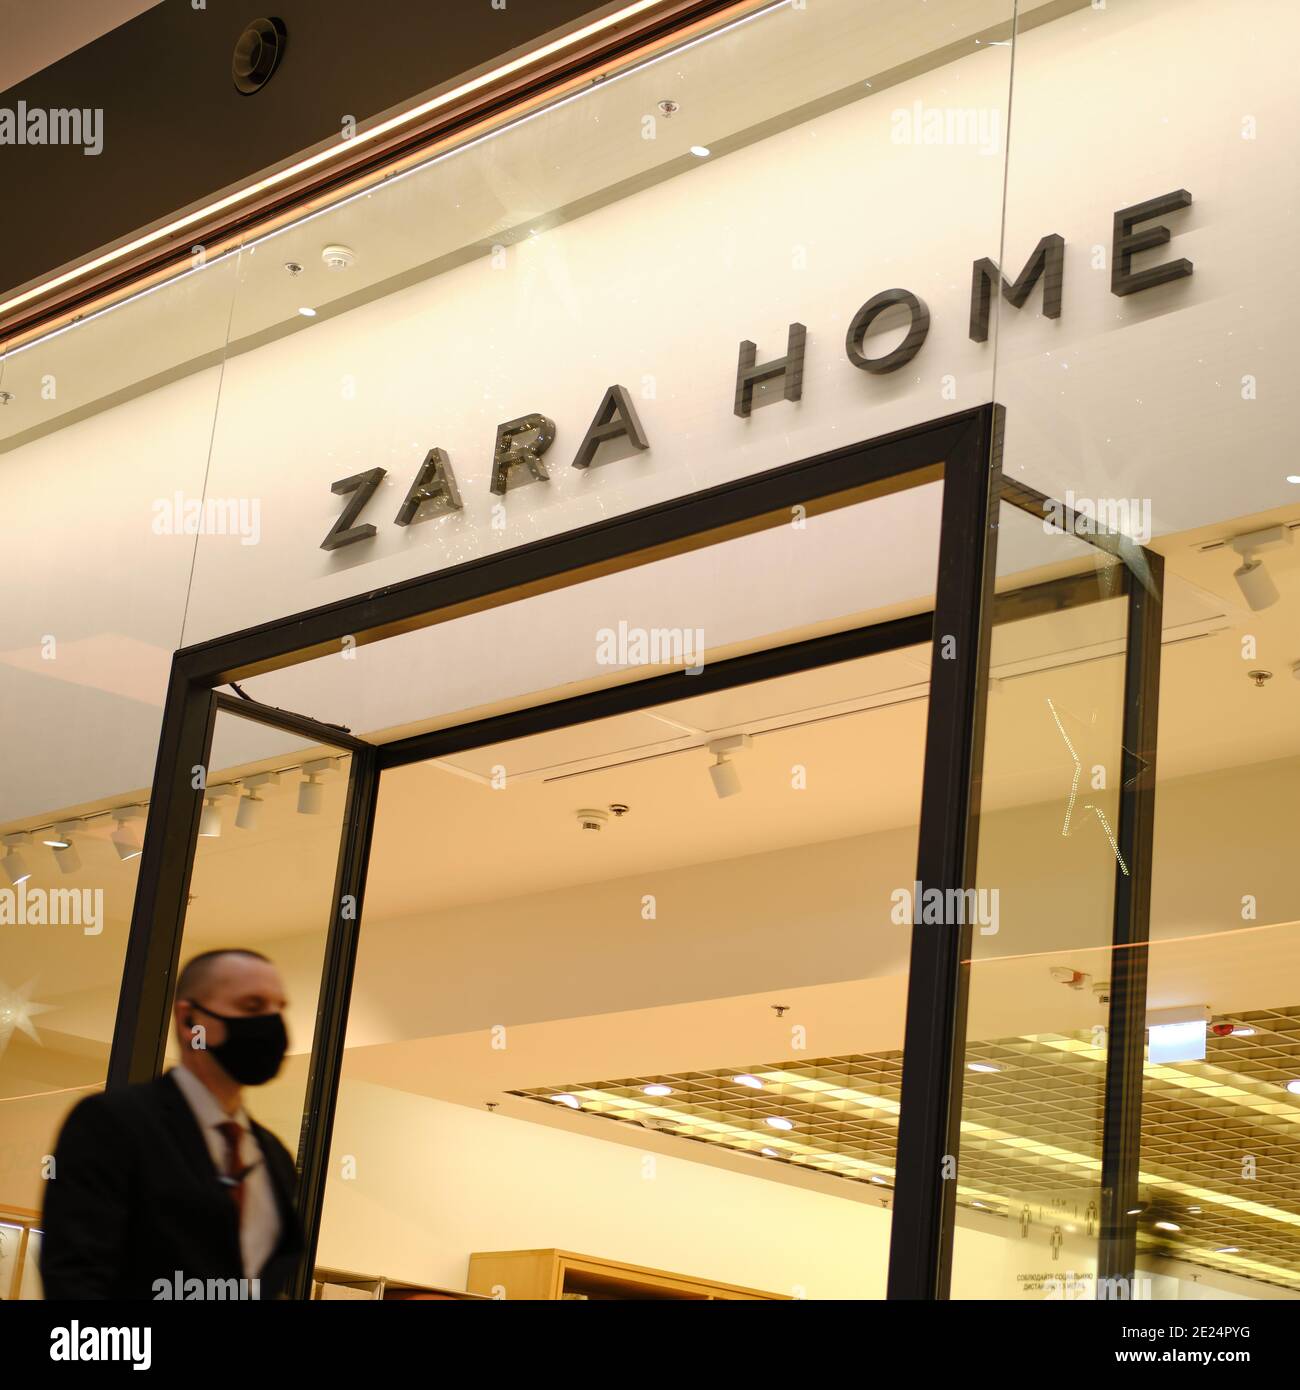 Zara Logo Shopping Street High Resolution Stock Photography and Images -  Alamy